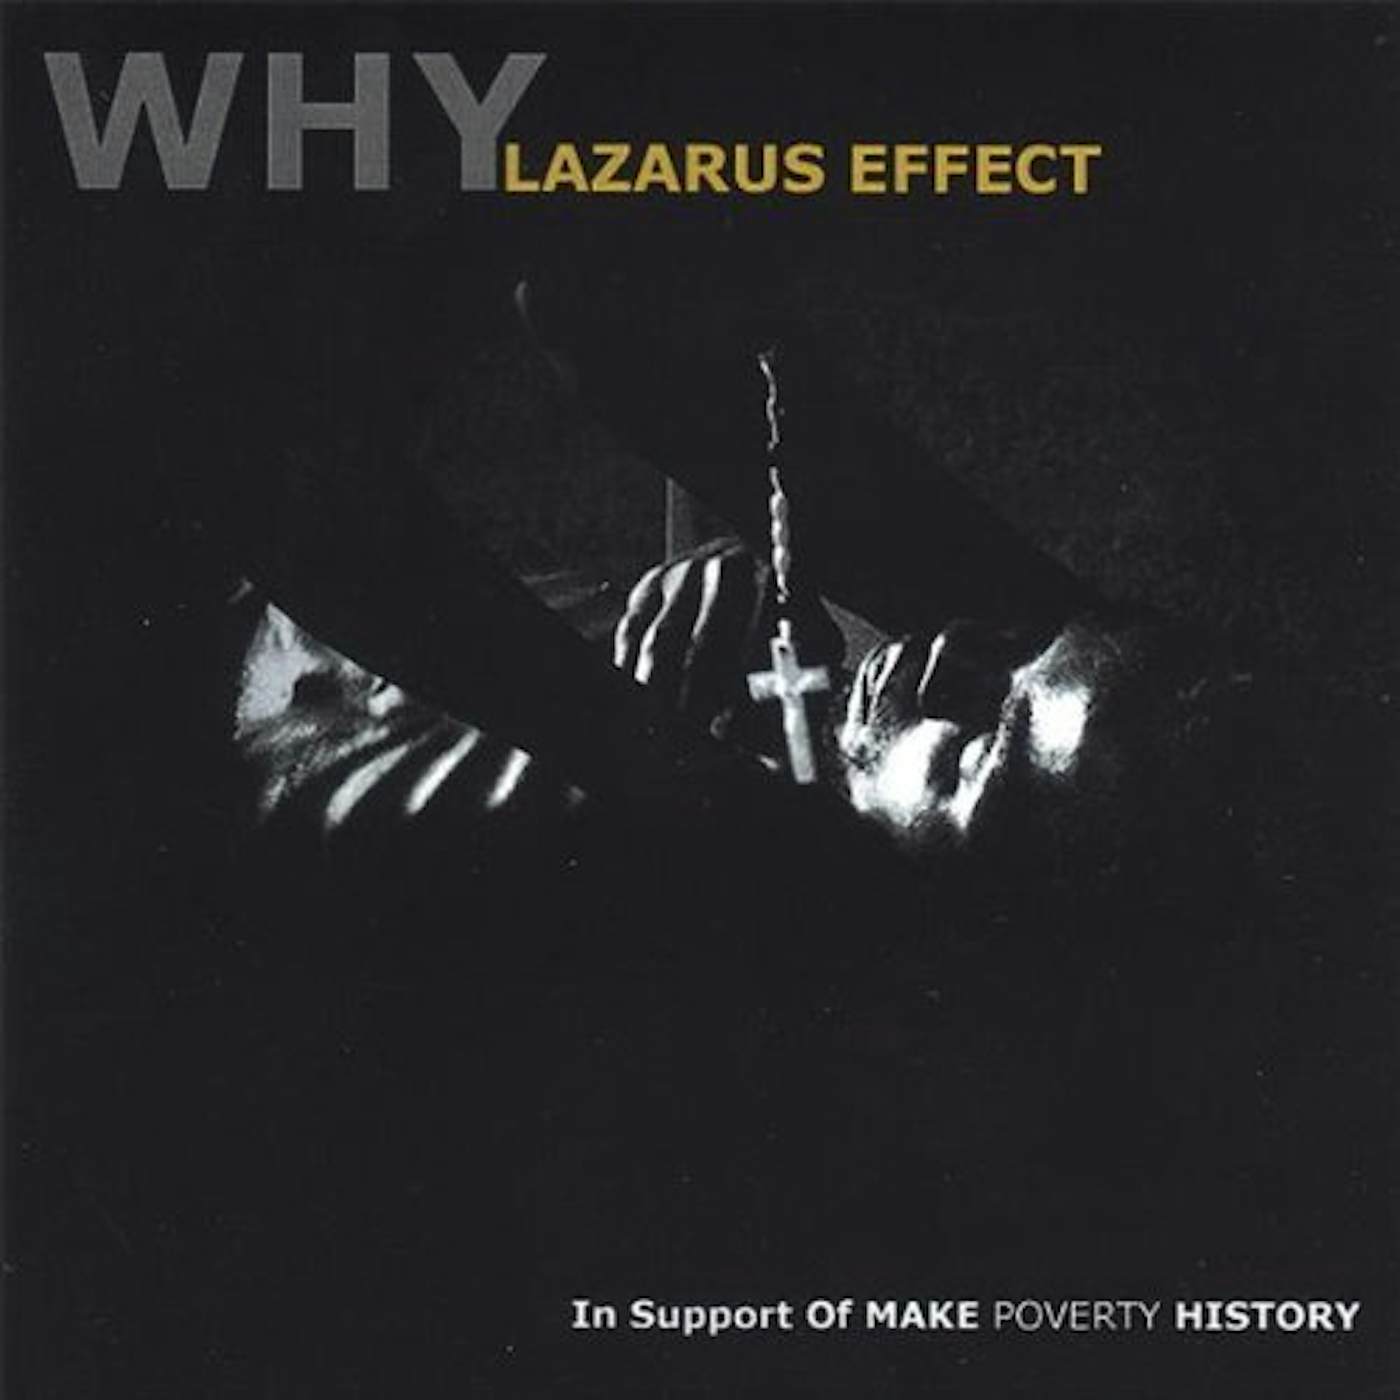 Why LAZARUS EFFECT CD